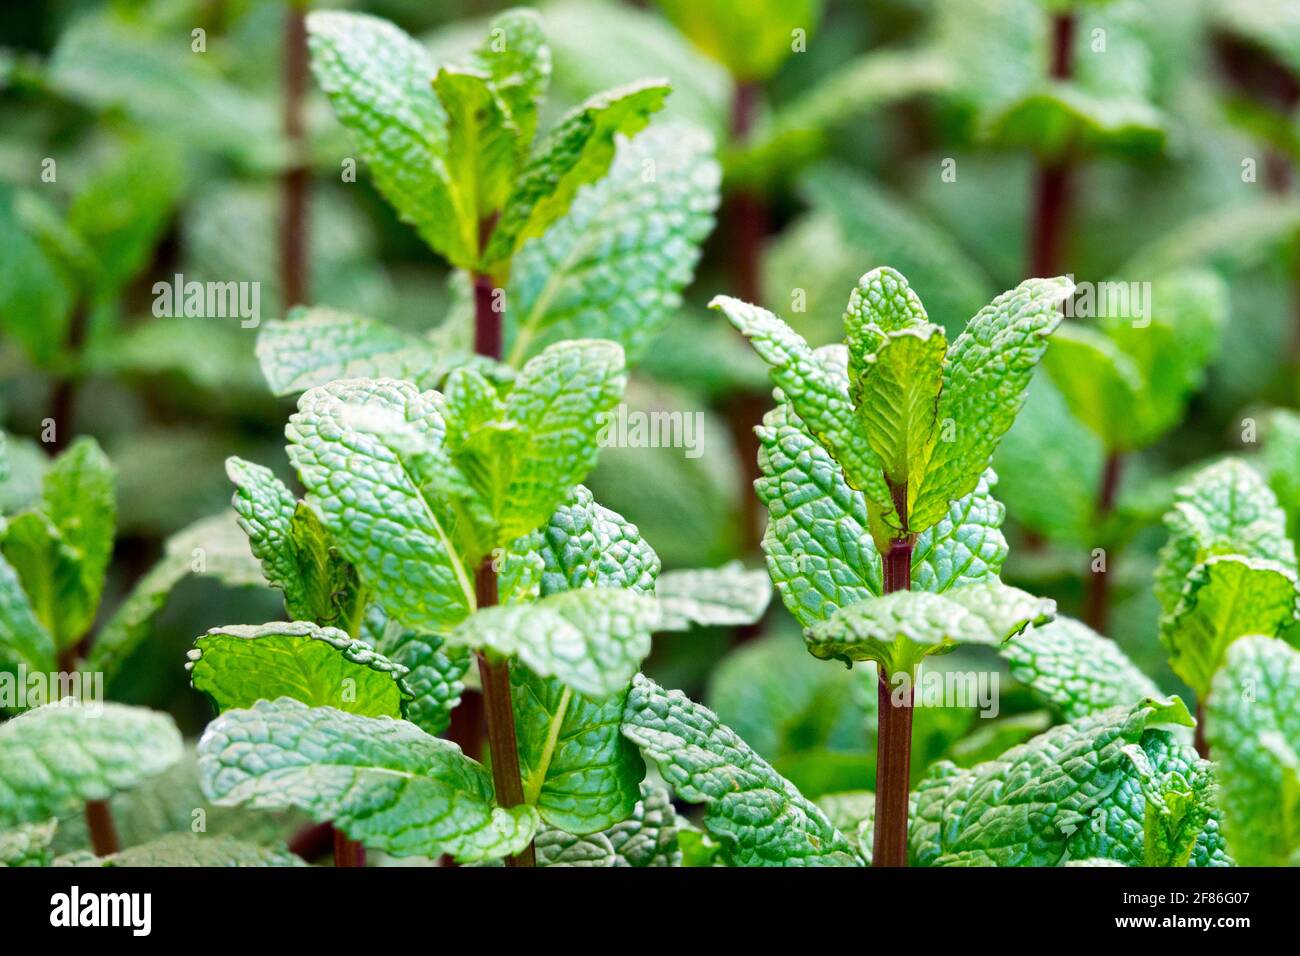 Mentha spicata Culinary Herb Spearmint Common Mint Growing in Garden Mint Closeup Fresh New Leaves Herbs English Mint Mentha cordifolia Lamb Mint Herb Stock Photo